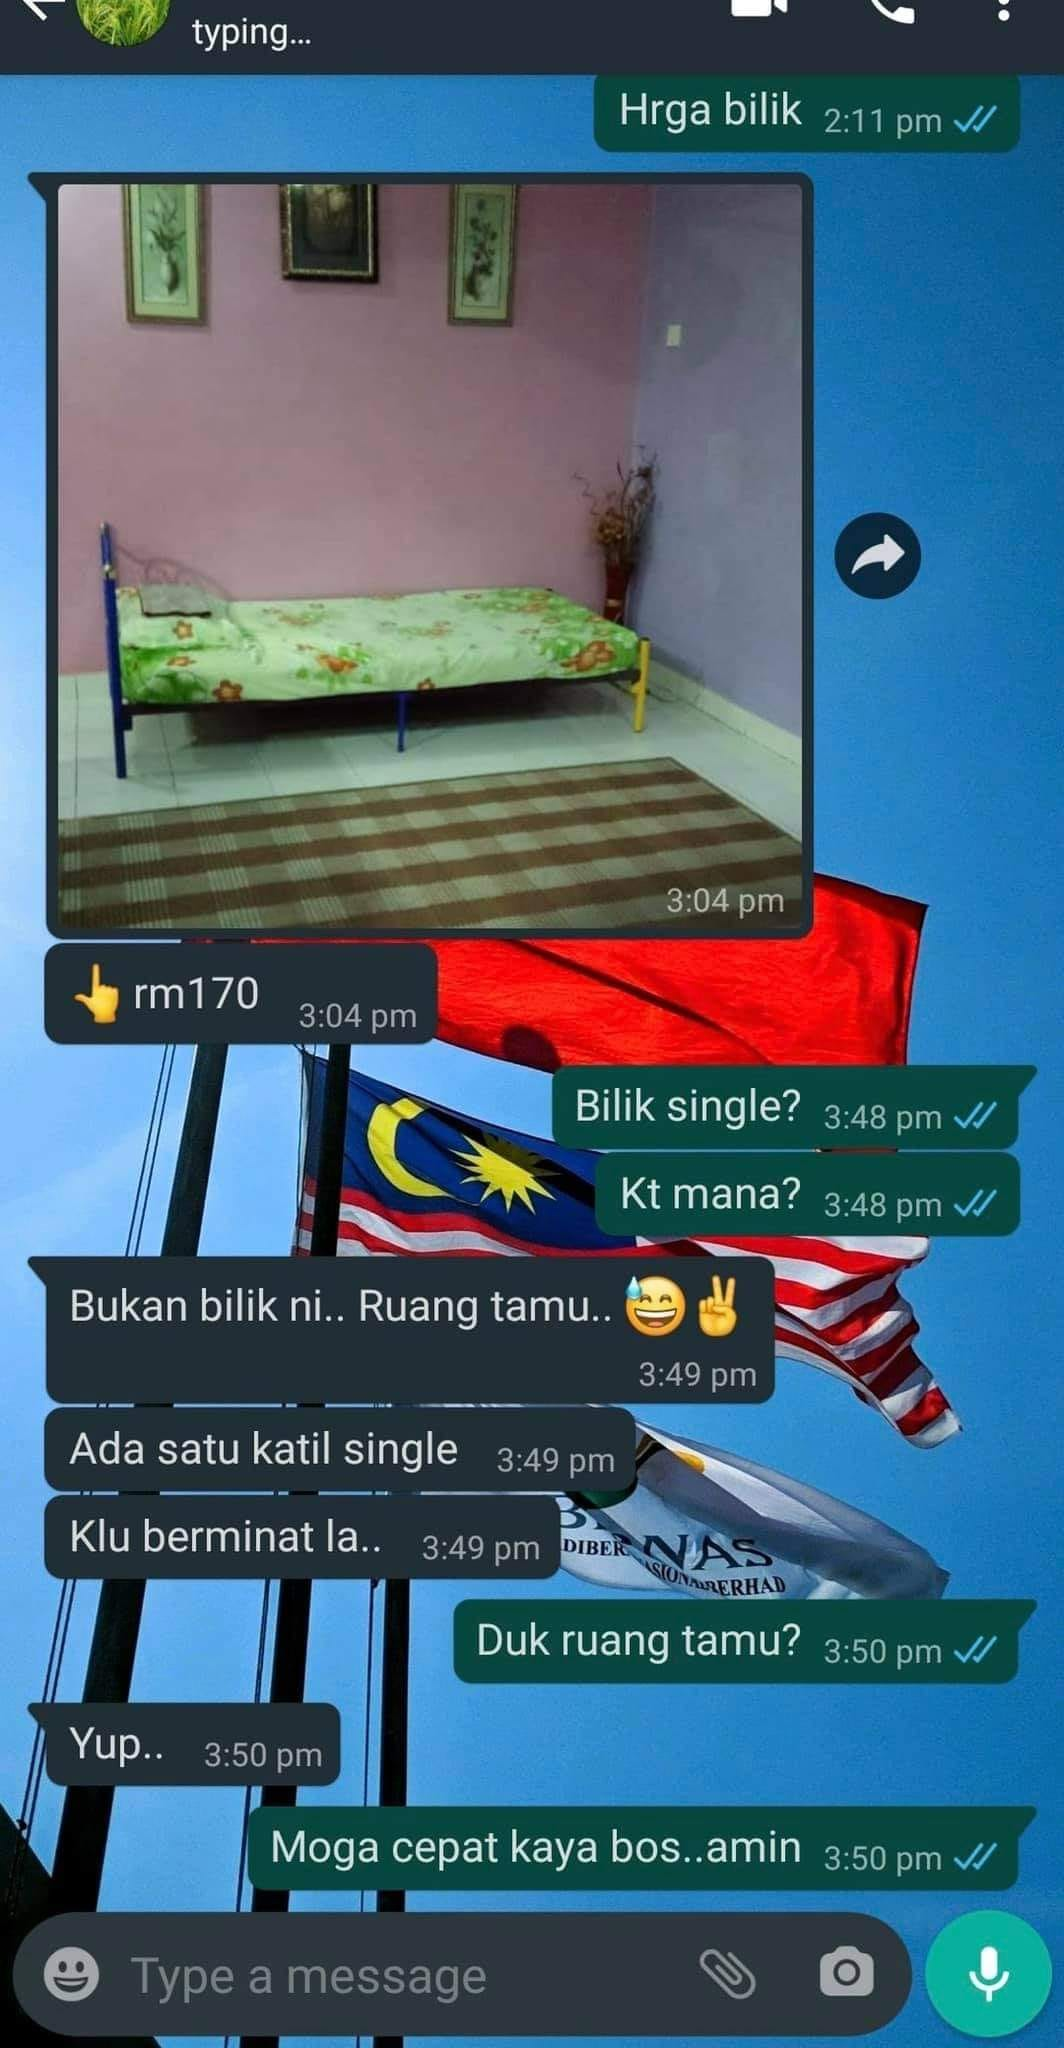 M'sian landlord rents living room with single bed for rm170